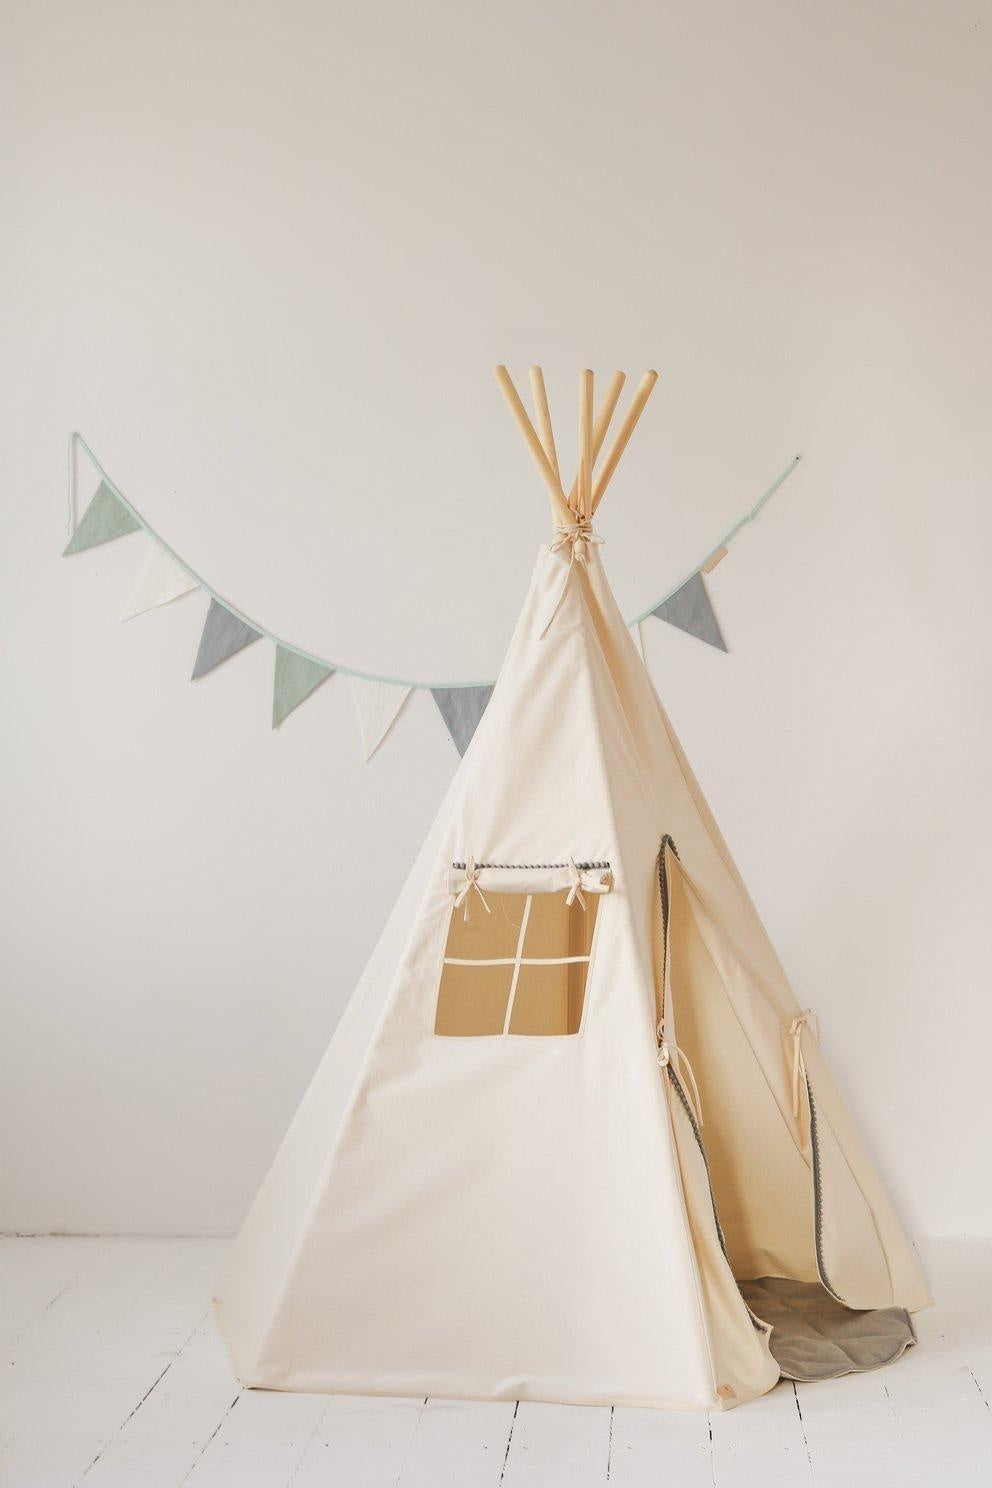 Teepee Tent “Grey Pompoms” with Pompoms